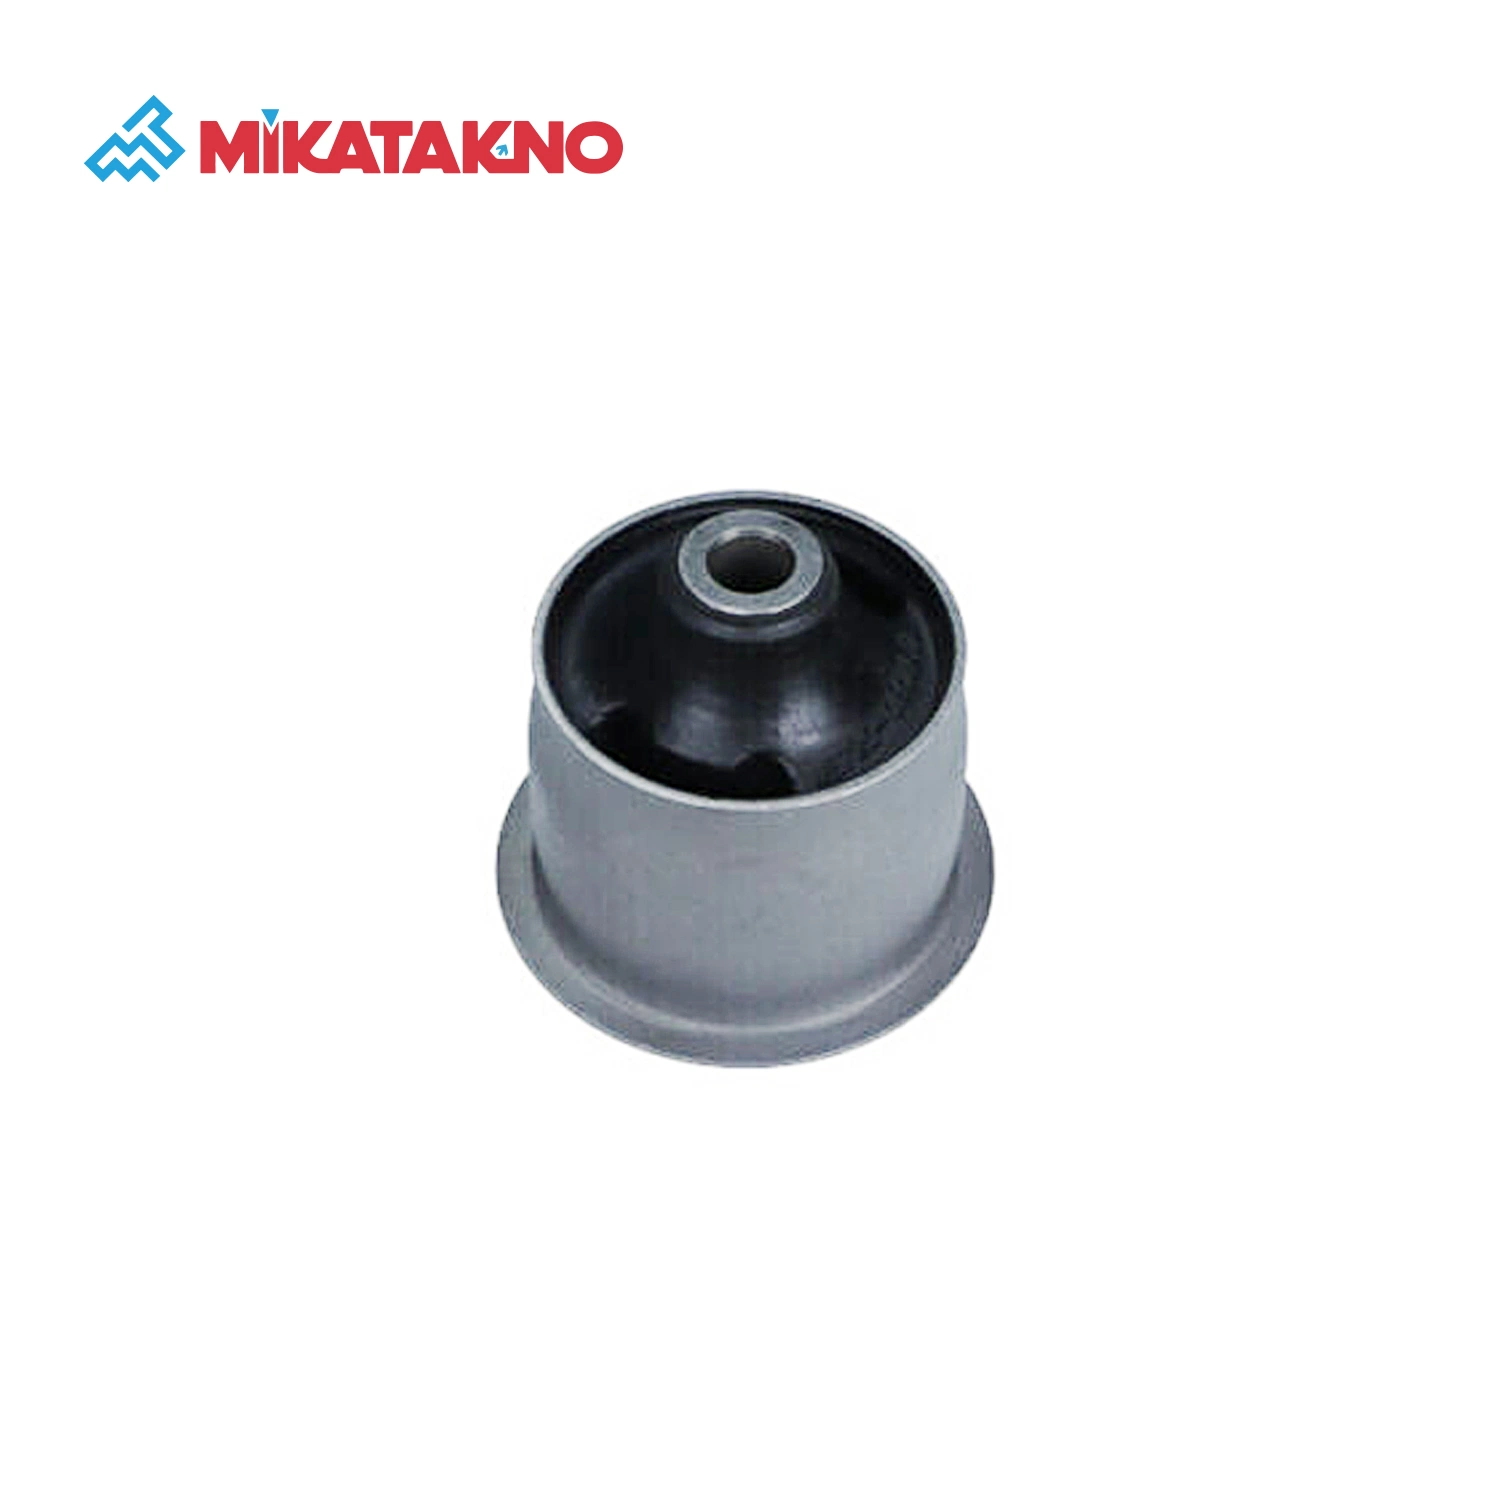 Supplier of Auto Suspension Parts Bushings for All Sentra Cars in High Quality